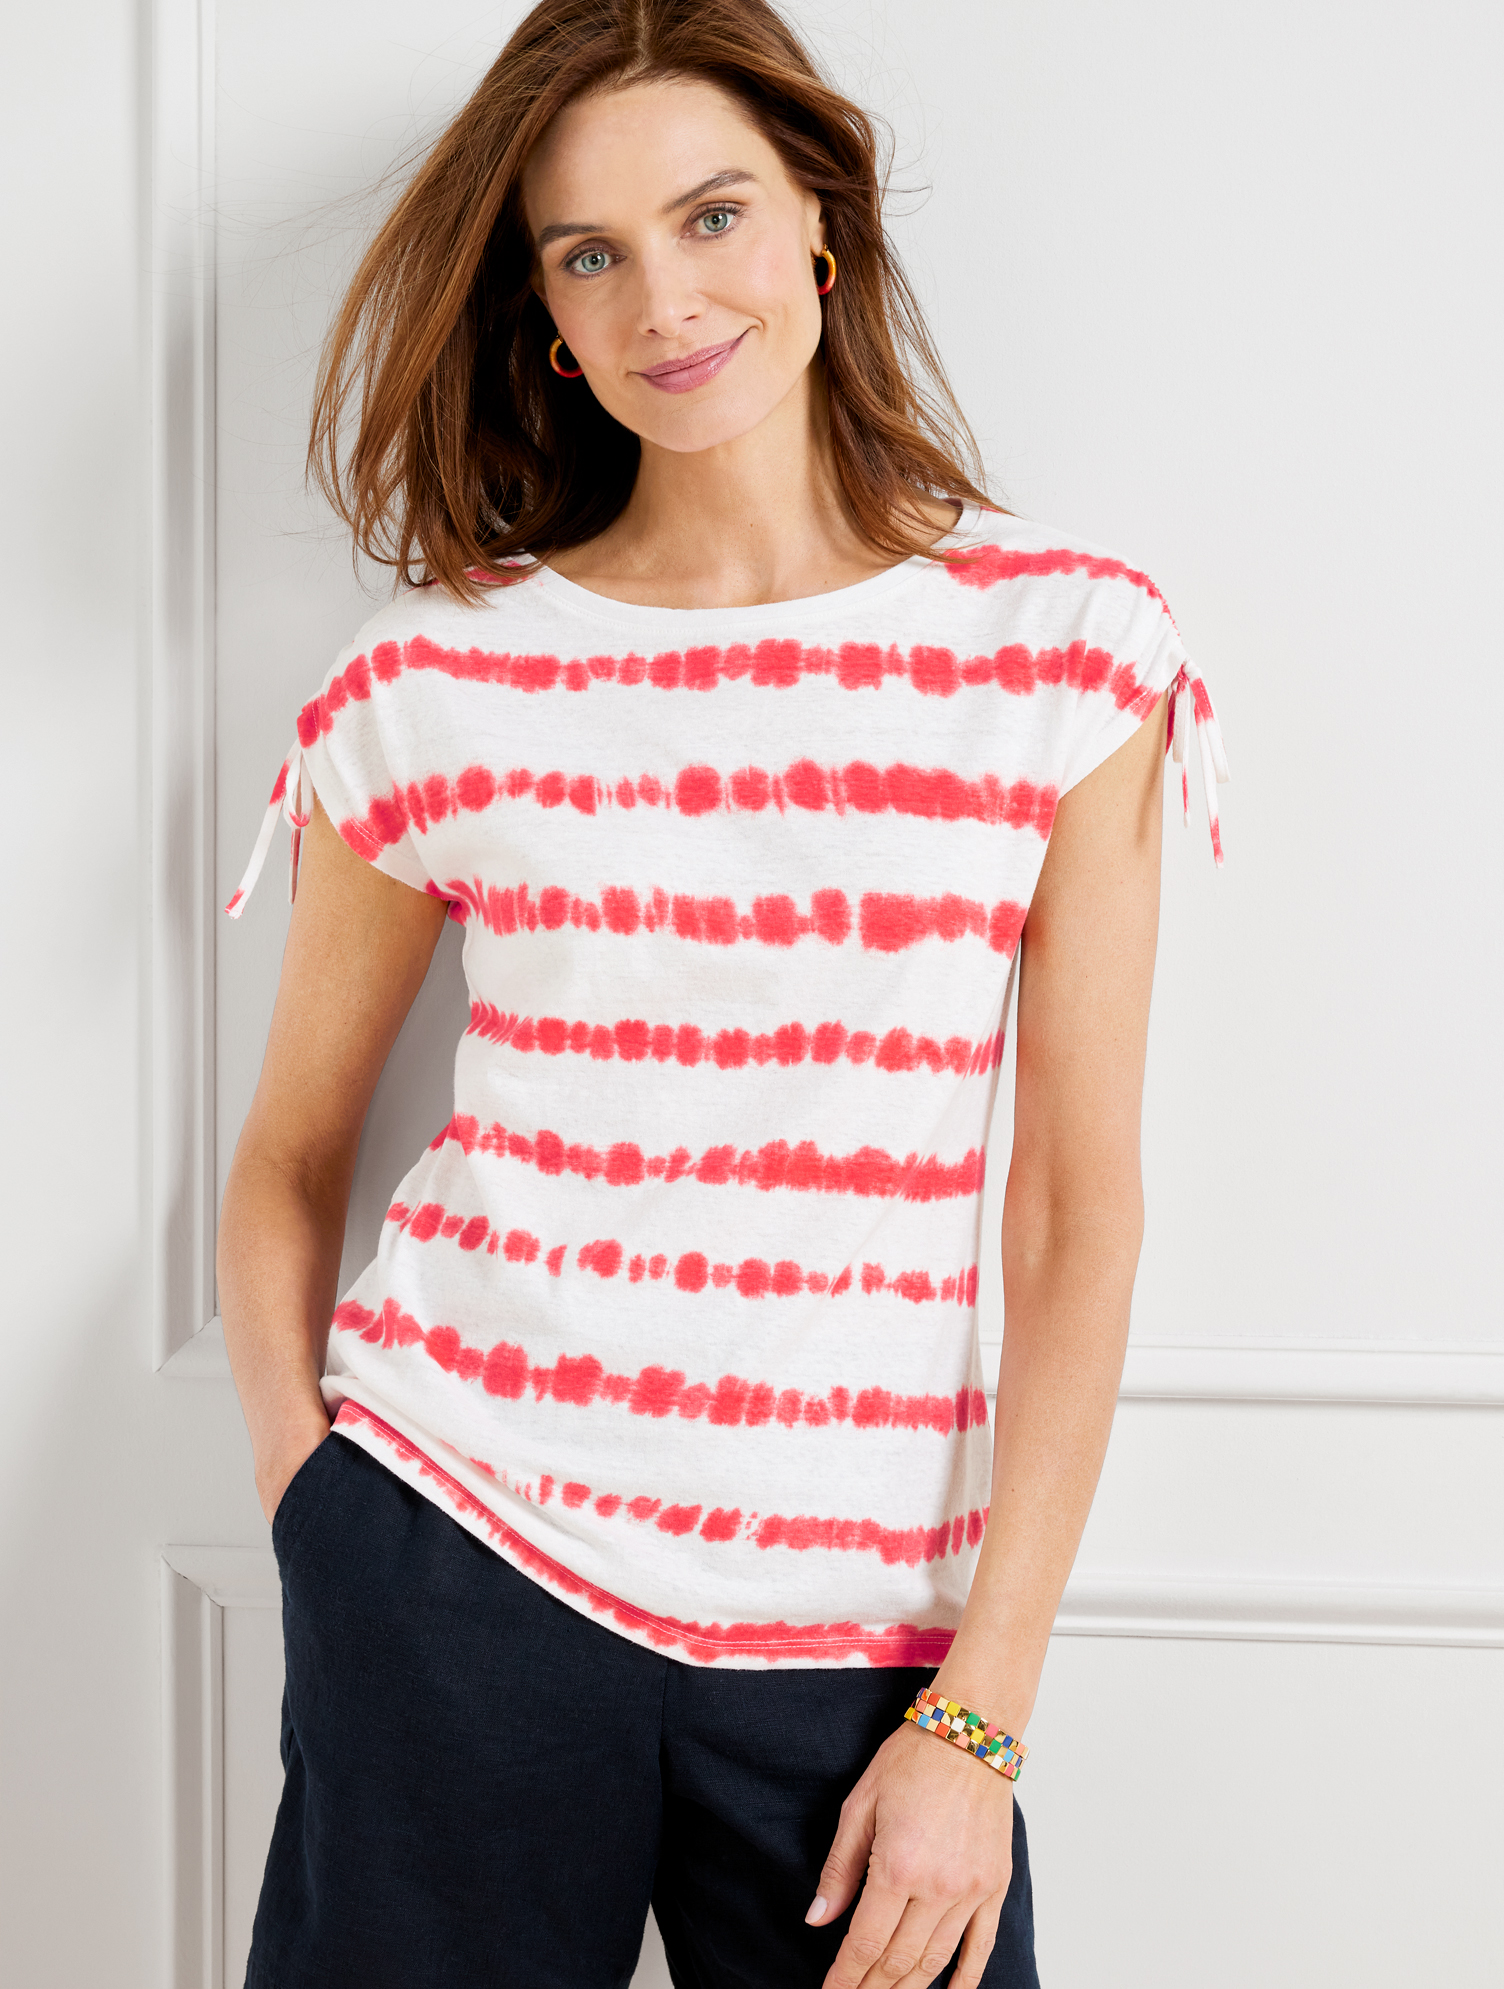 Talbots Cinched Shoulder Bateau Neck T-shirt - Tie-dye Stripe - White/red - 3x  In White,red